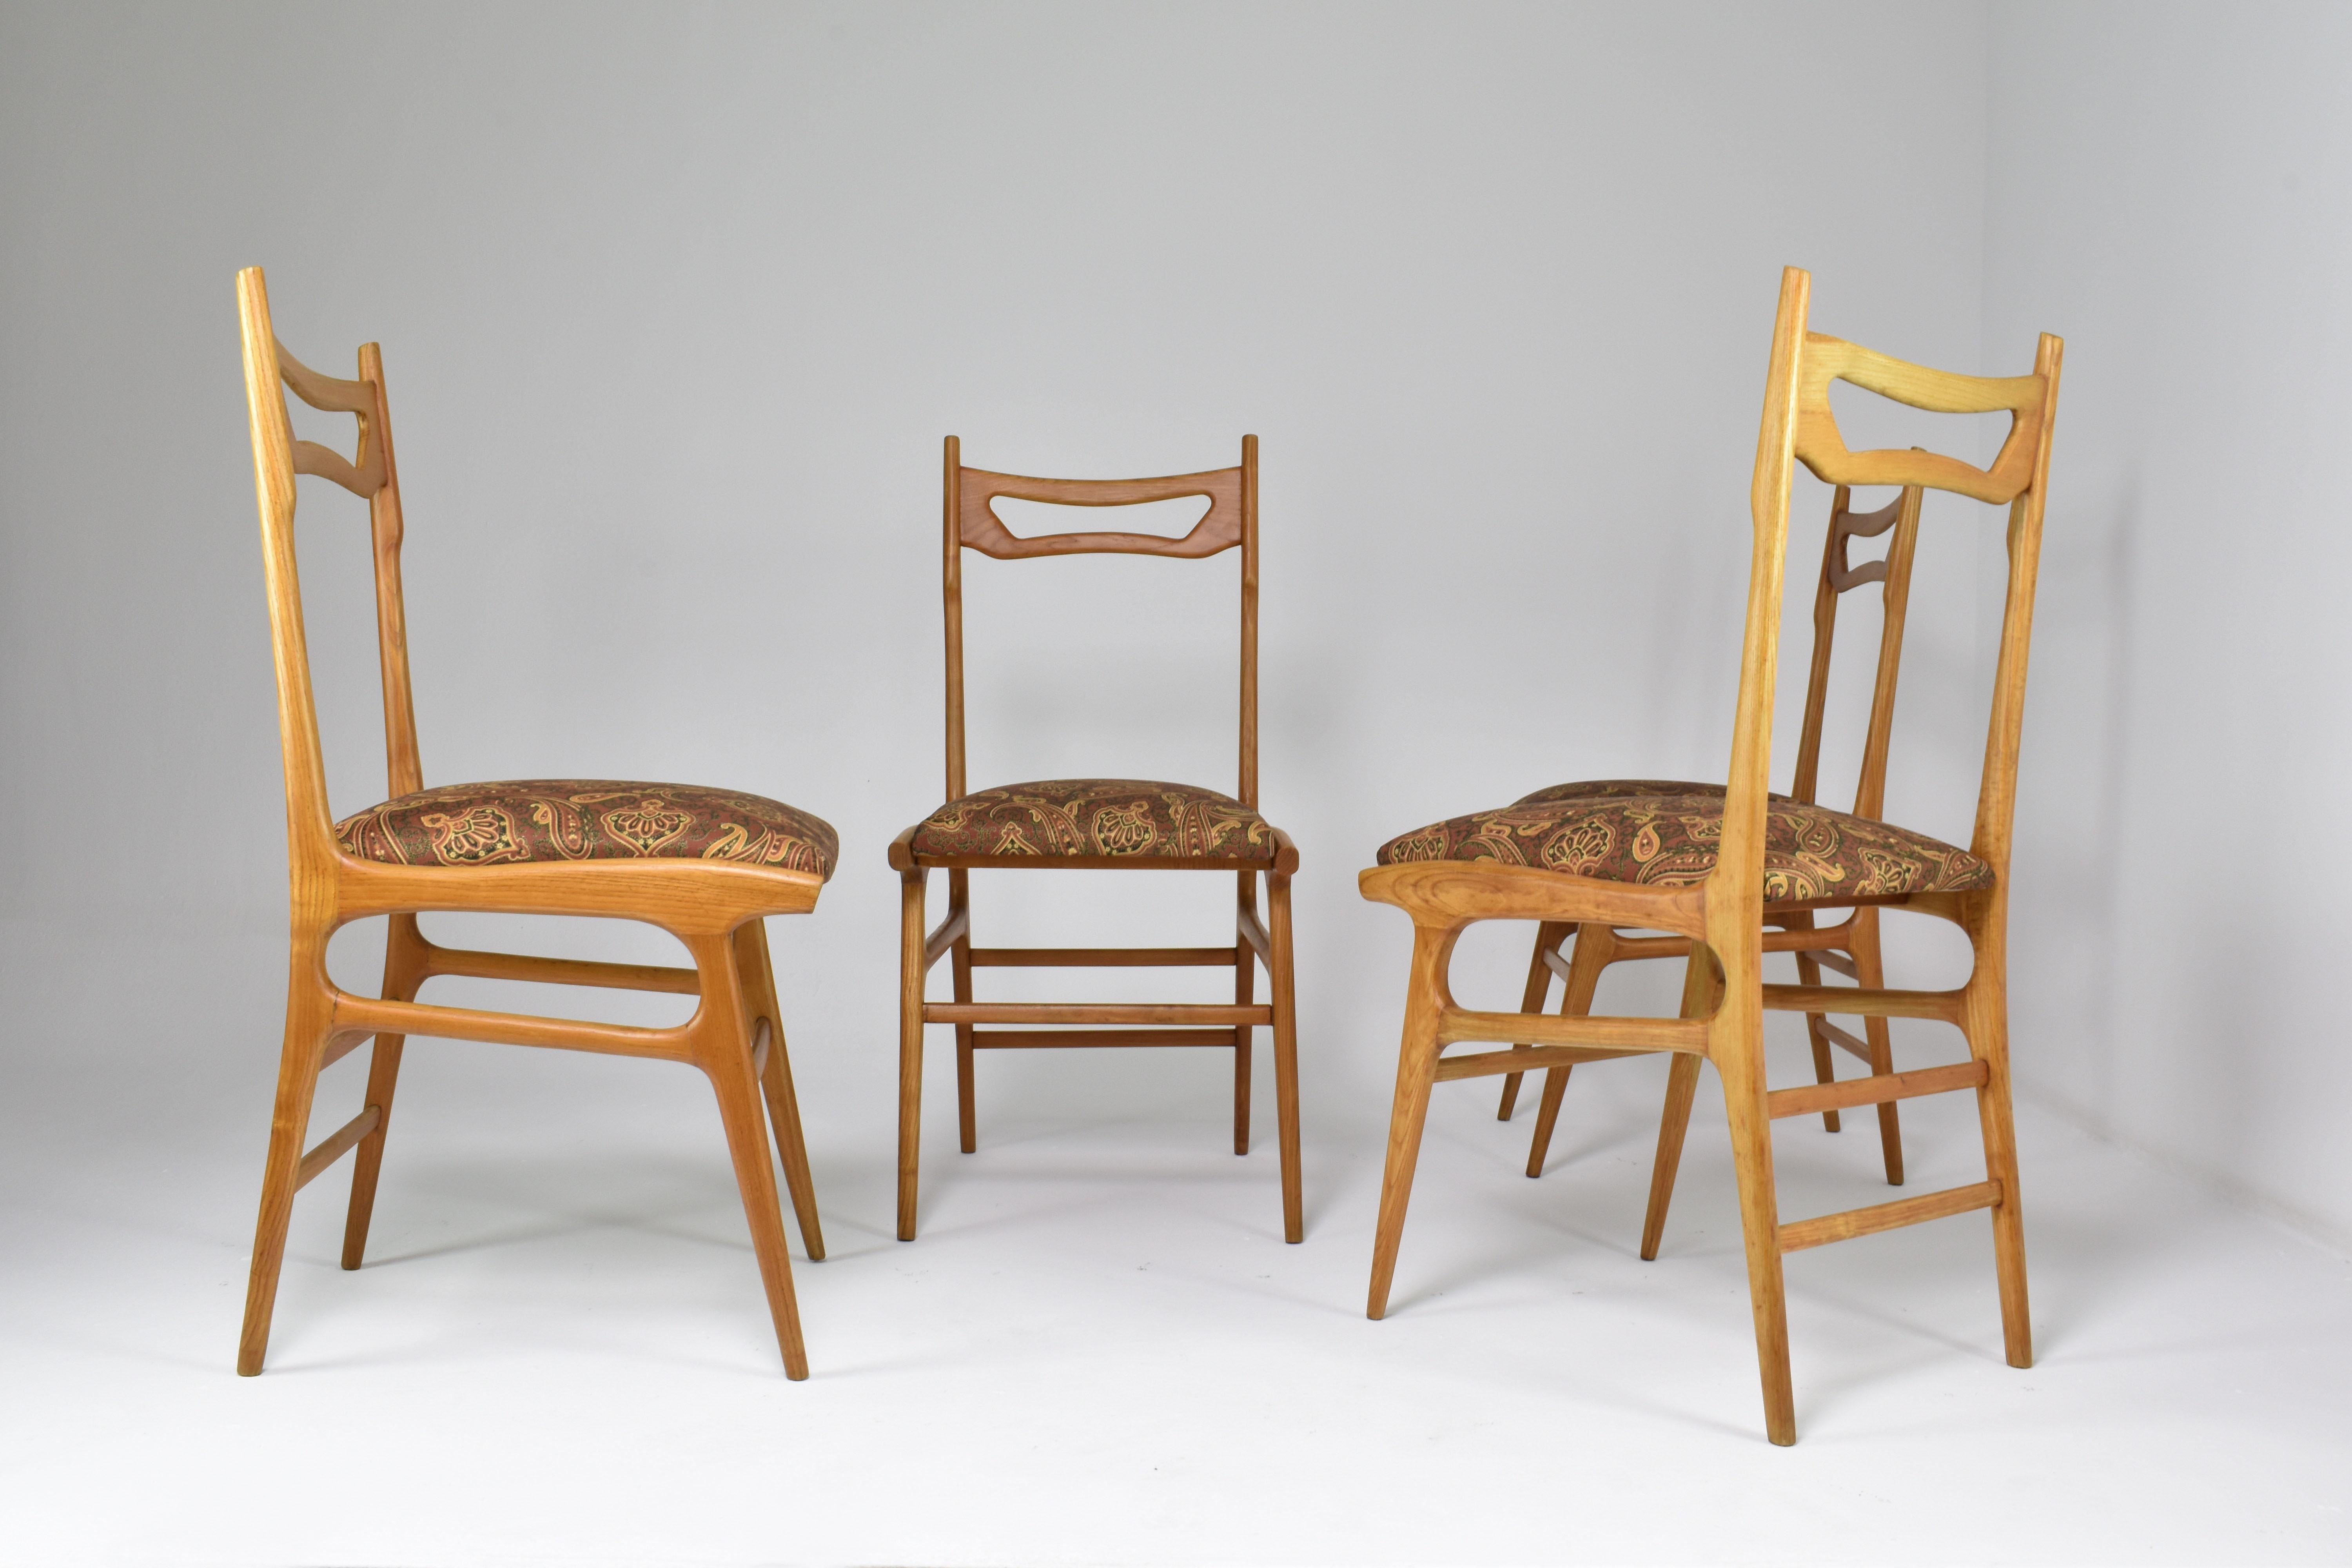 20th Century Italian Vintage Wooden Dining Chairs, Set of Four, 1950s For Sale